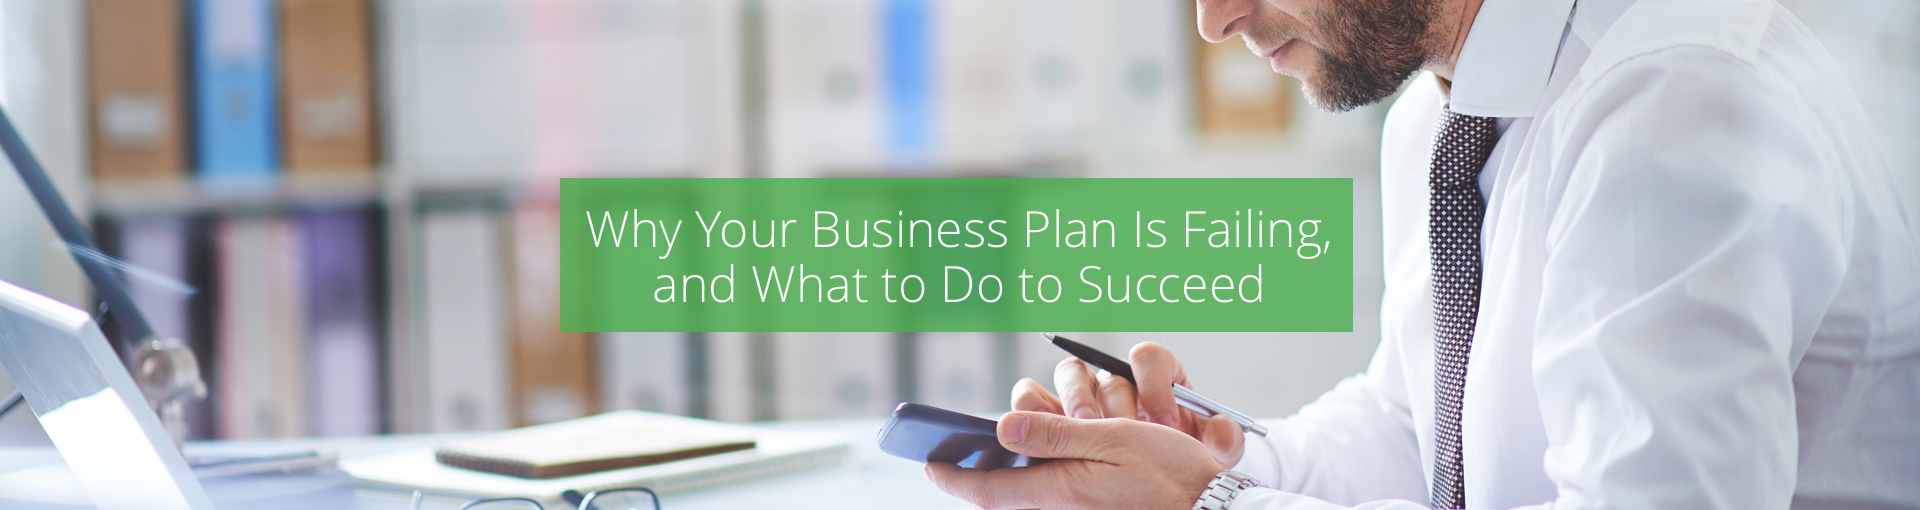 Why Your Business Plan Is Failing, and What to Do to Succeed Featured Image